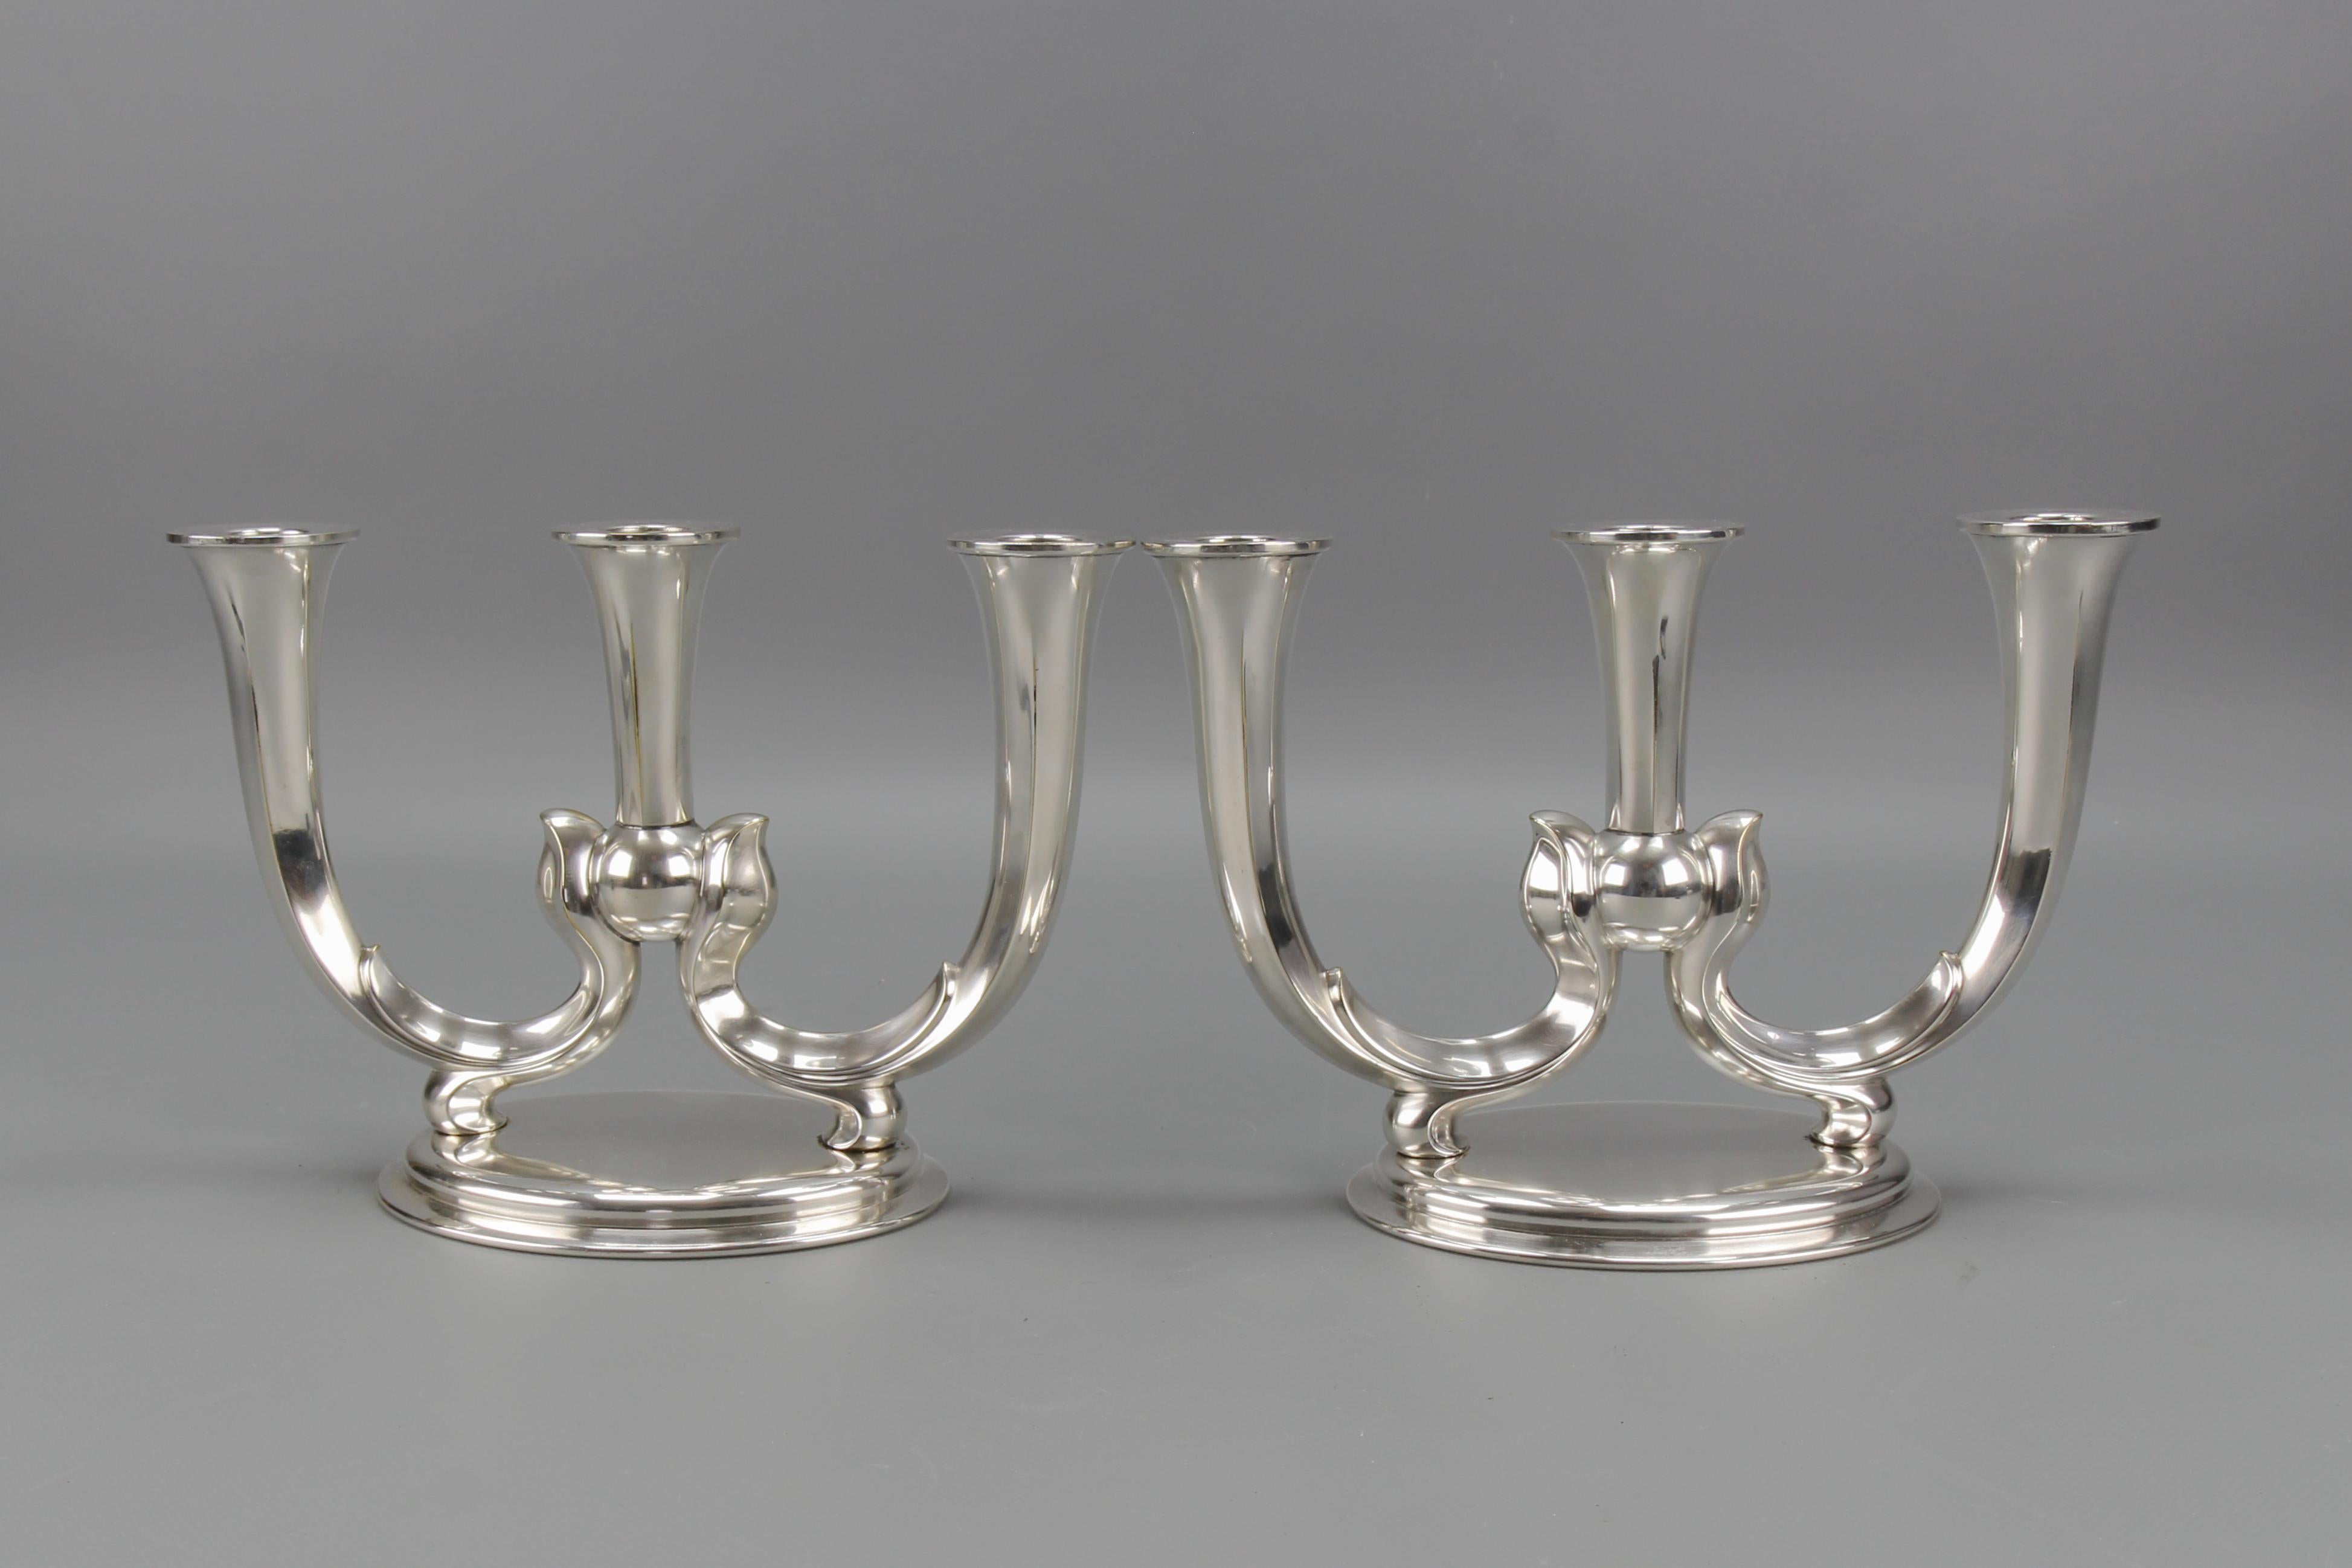 A pair of German WMF Art Deco three-arm candle holders.
An elegant pair of Art Deco nickel-plated brass three-arms candle holders by WMF, Württembergische Metallwarenfabrik, Germany, circa the 1930s.
In good condition with slight signs of